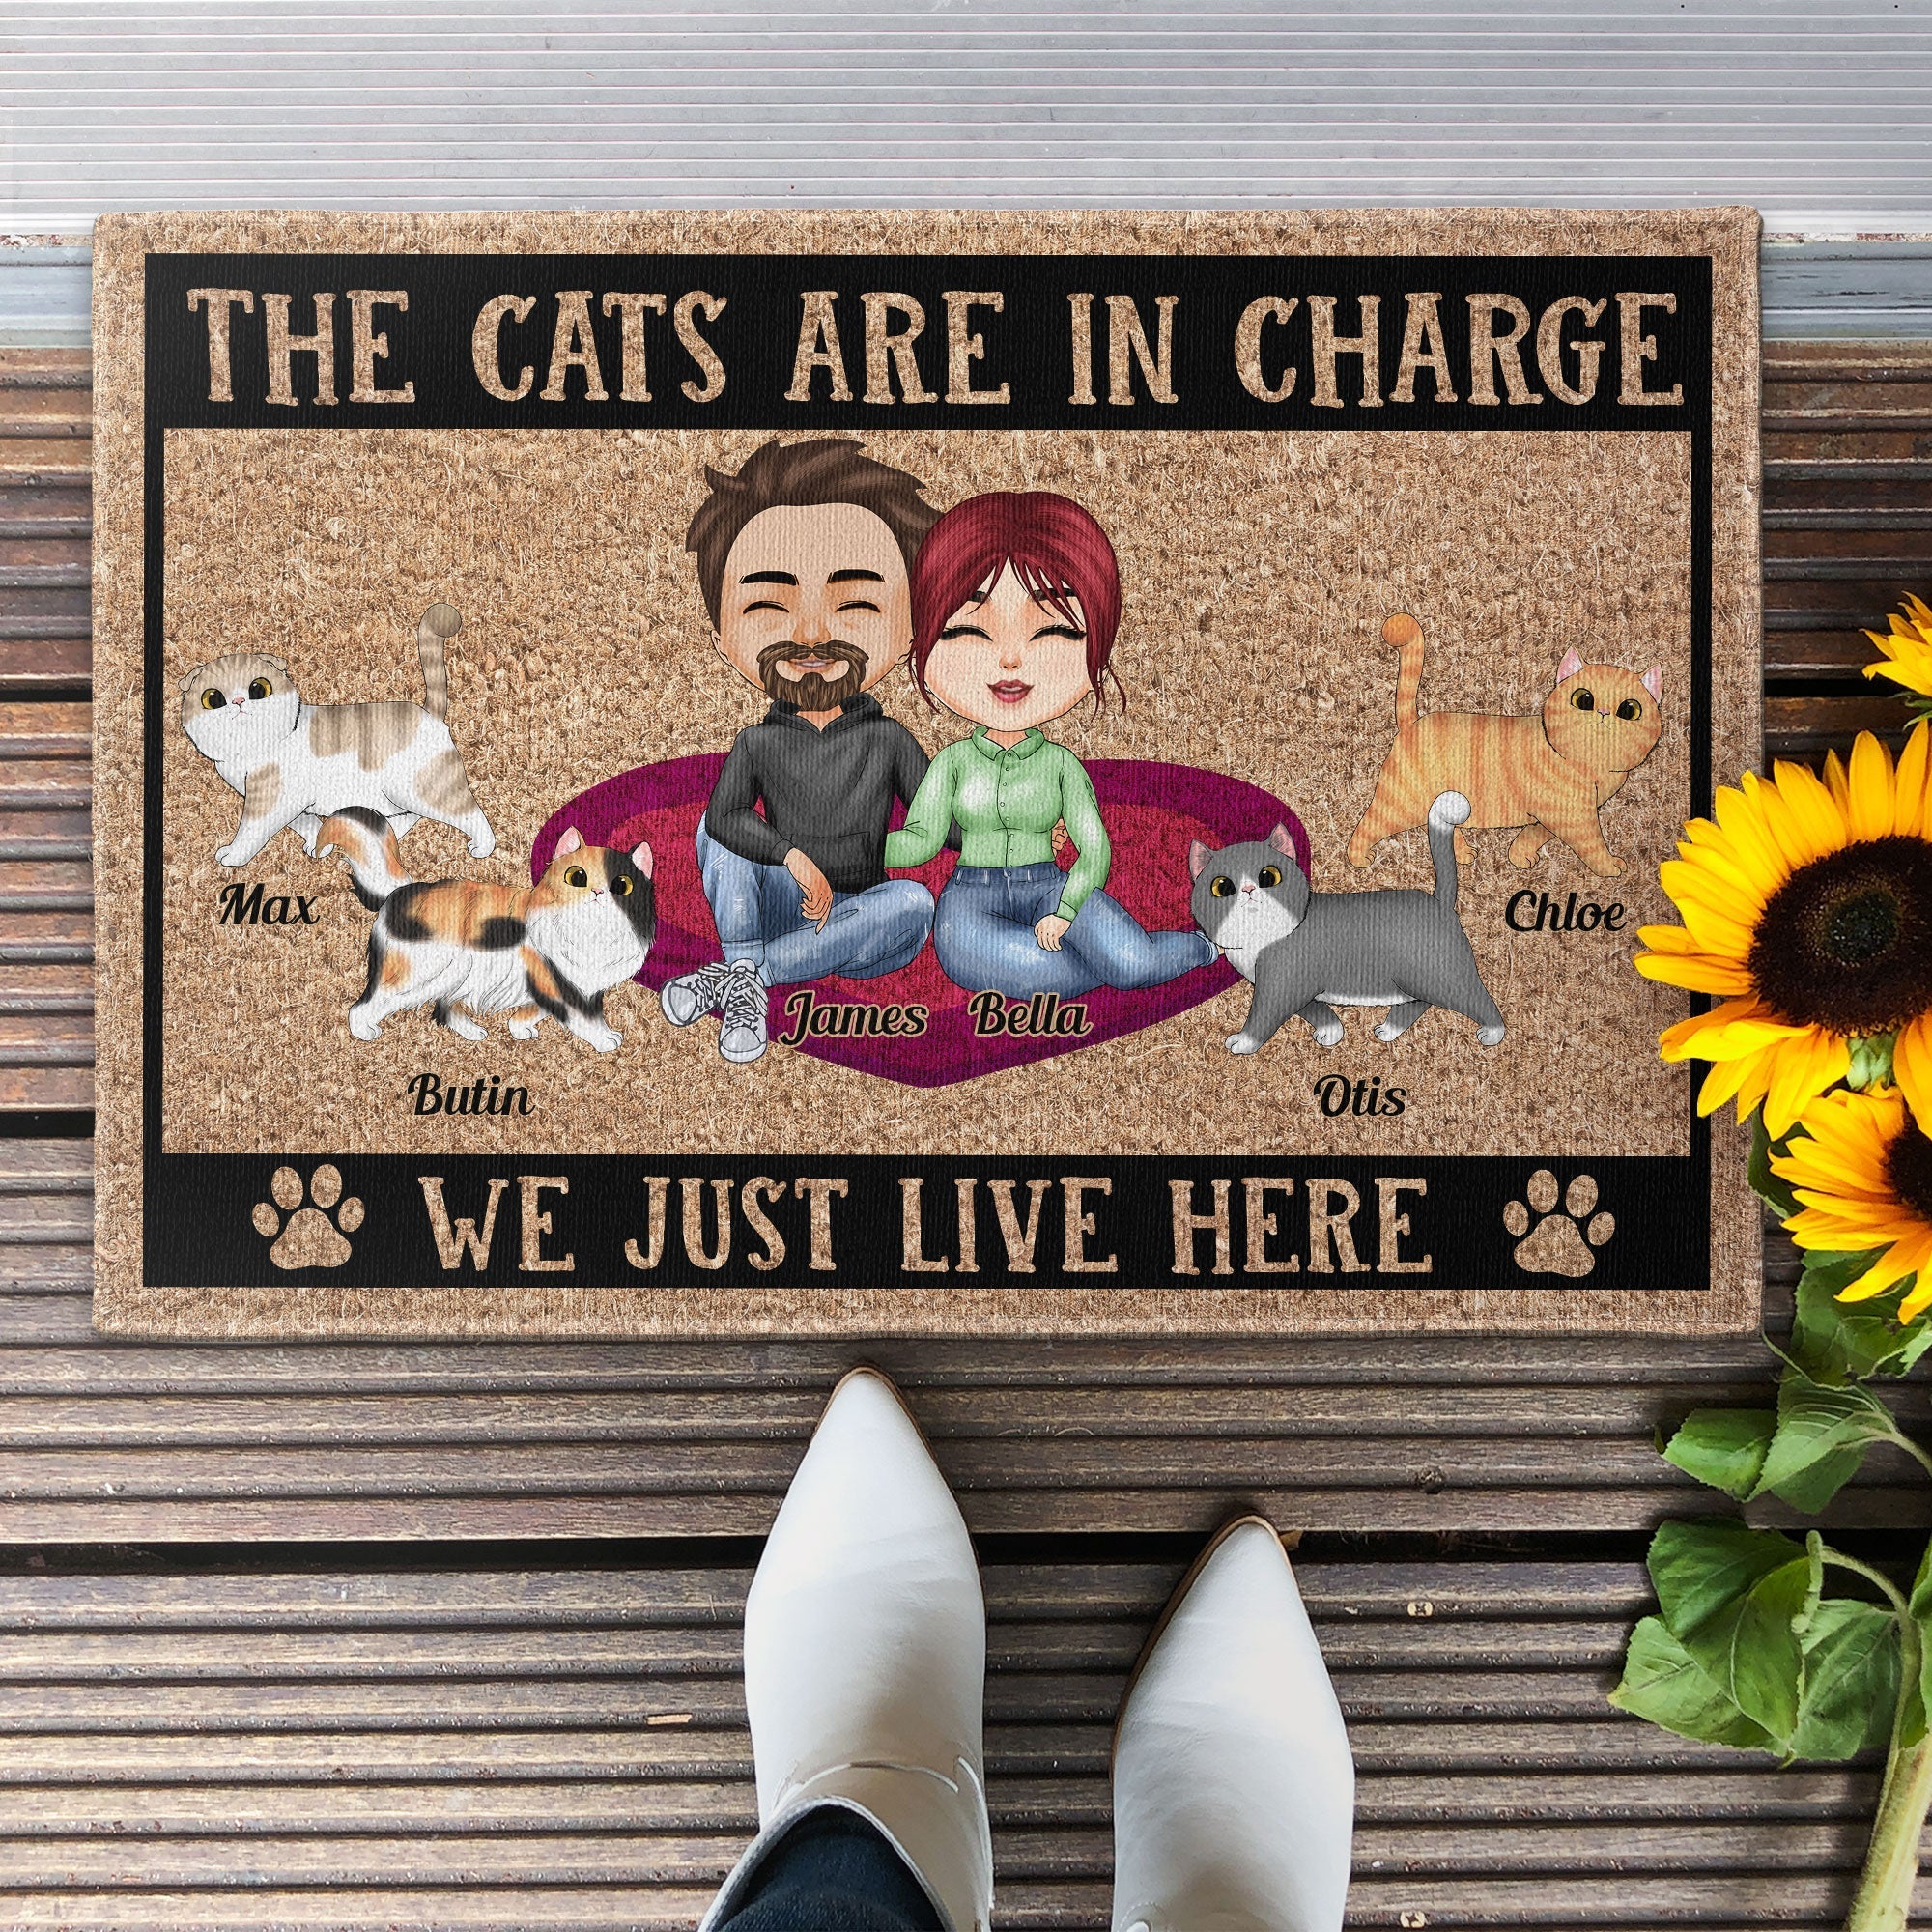 The Cats Are In Charge - Personalized Doormat - Home Decor - Gift For Cat Lover, Couple, Husband & Wife